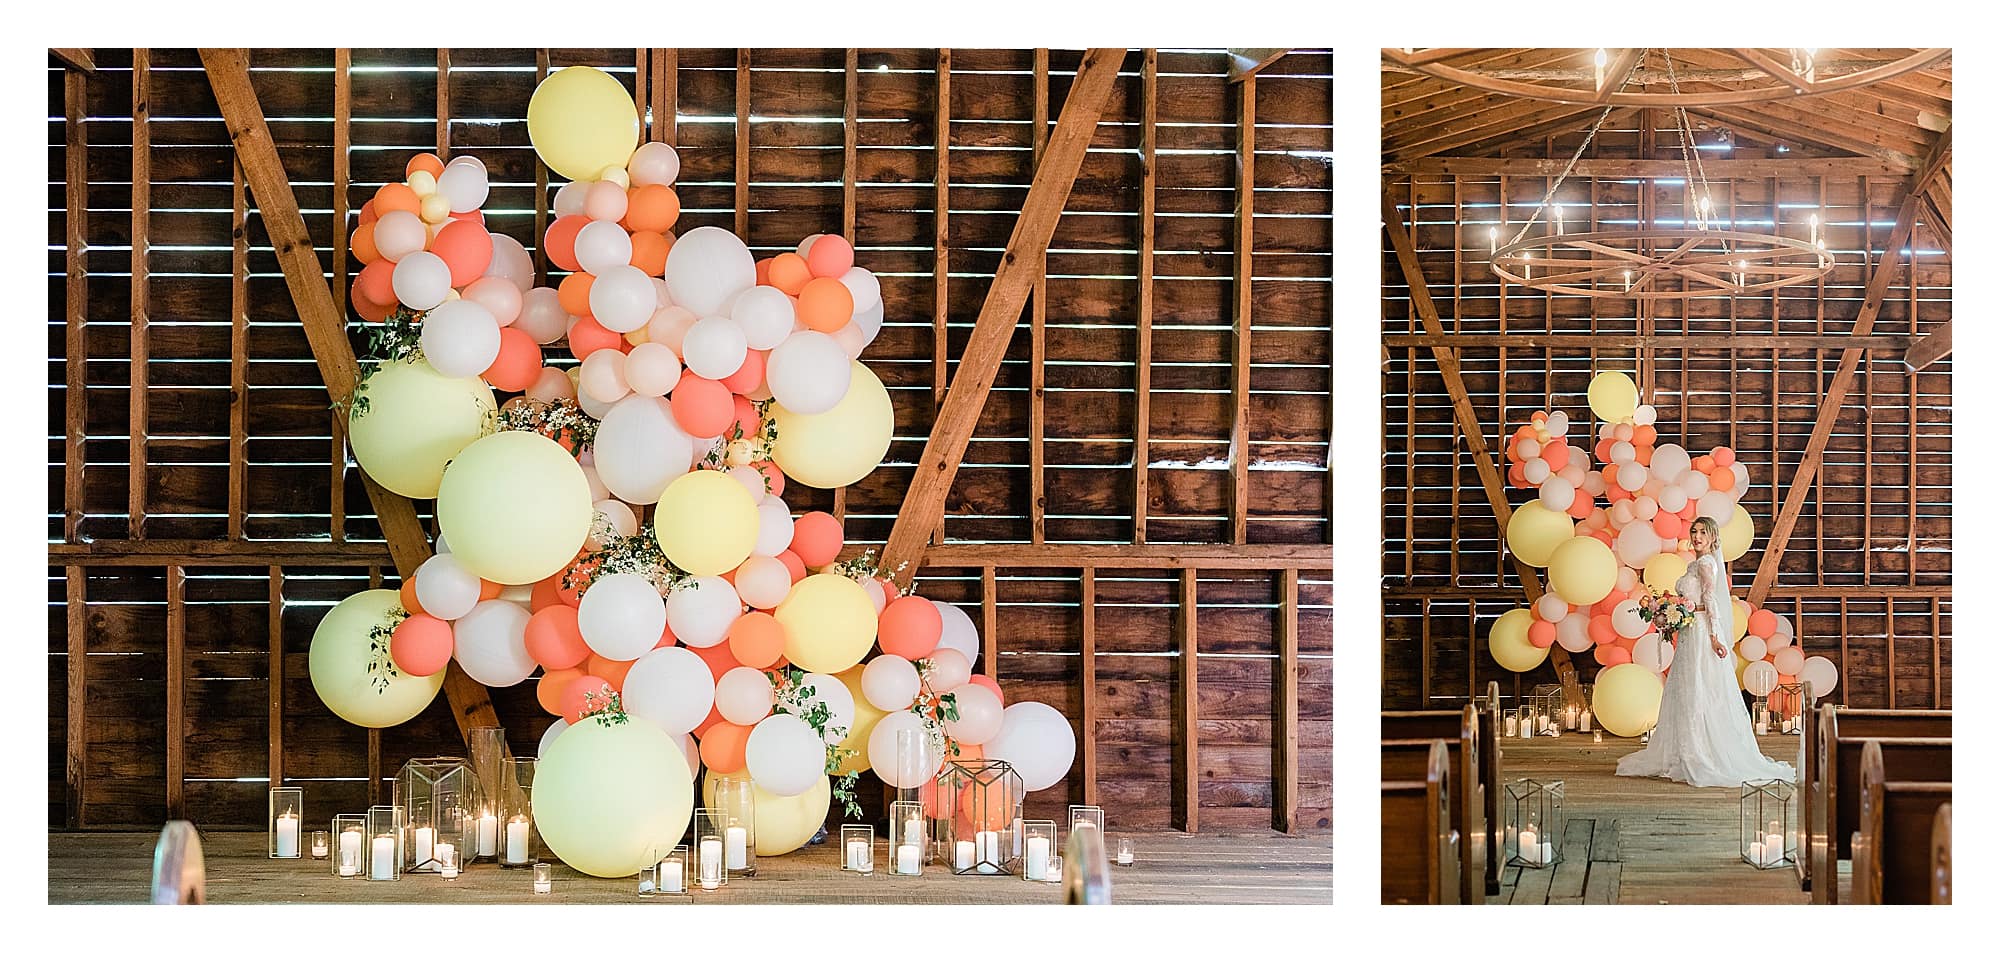 Bride in white two piece lace gown standing in wooden wedding chapel with yellow, orange, peach and white balloon backdrop with candles